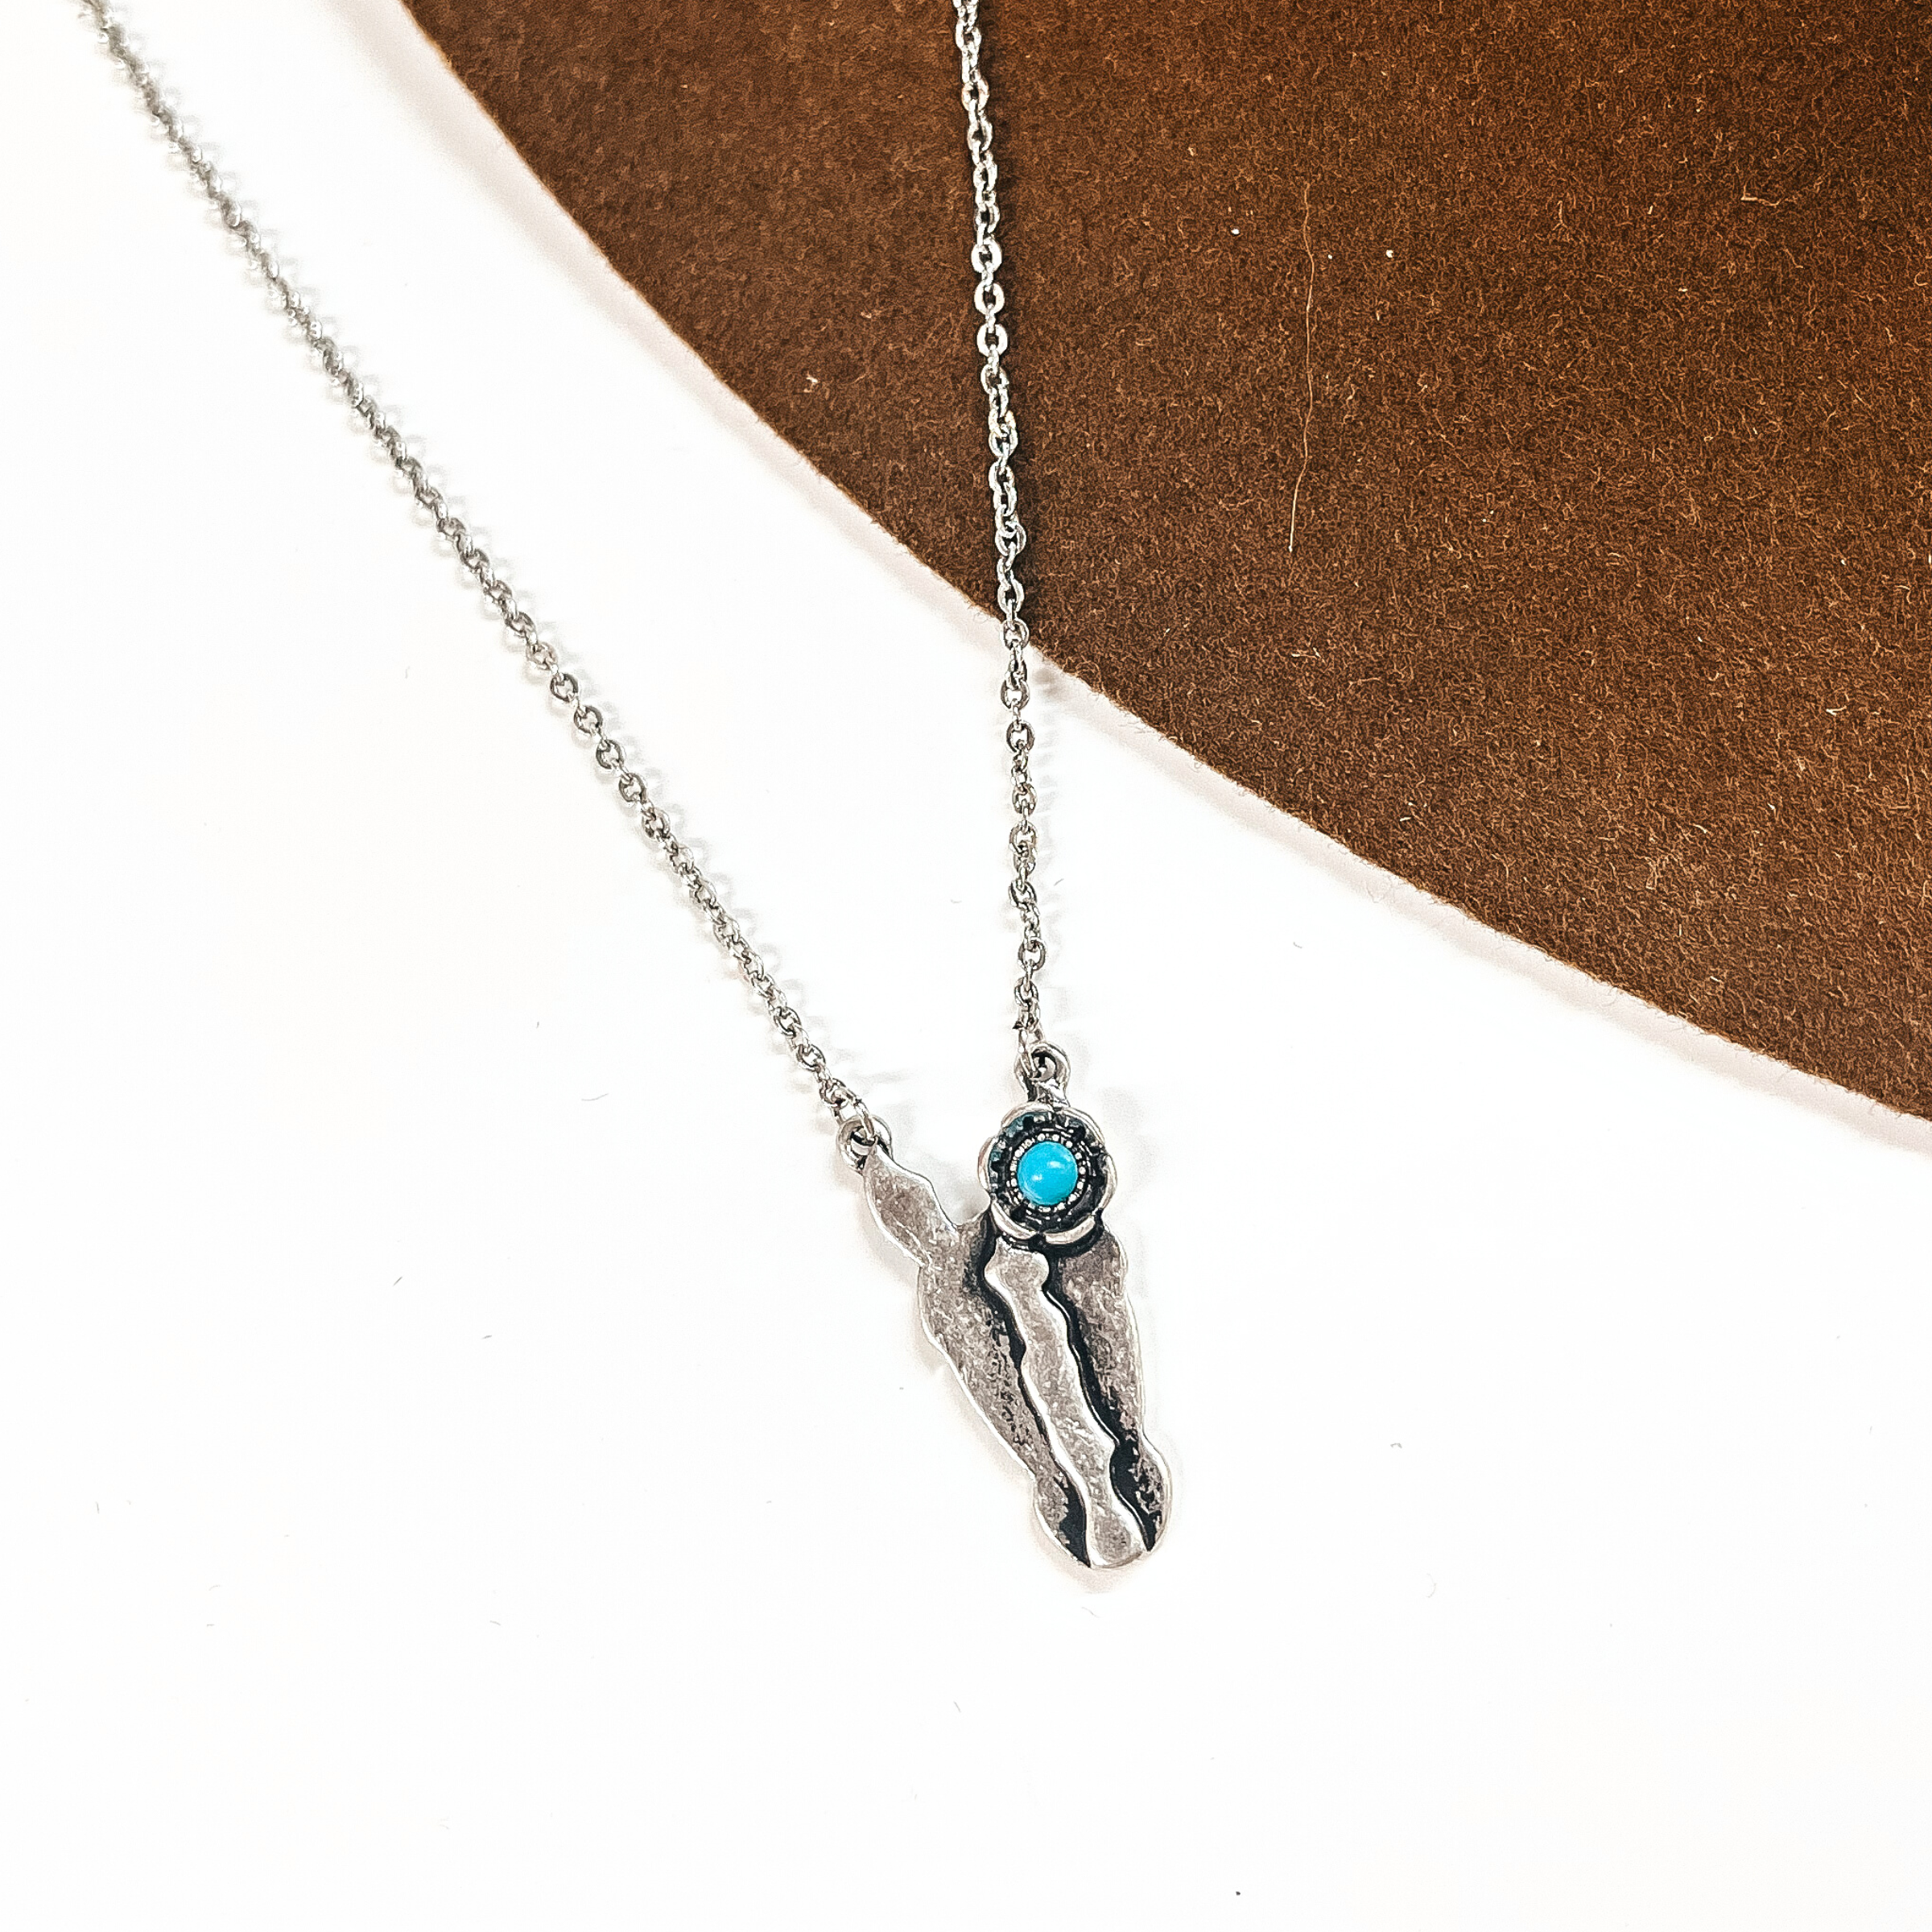 This is a silver chain necklace with a horse head pendant, has a small turquoise stone on the ear. This necklace is taken on a white background and on a dark brown felt hat brim.